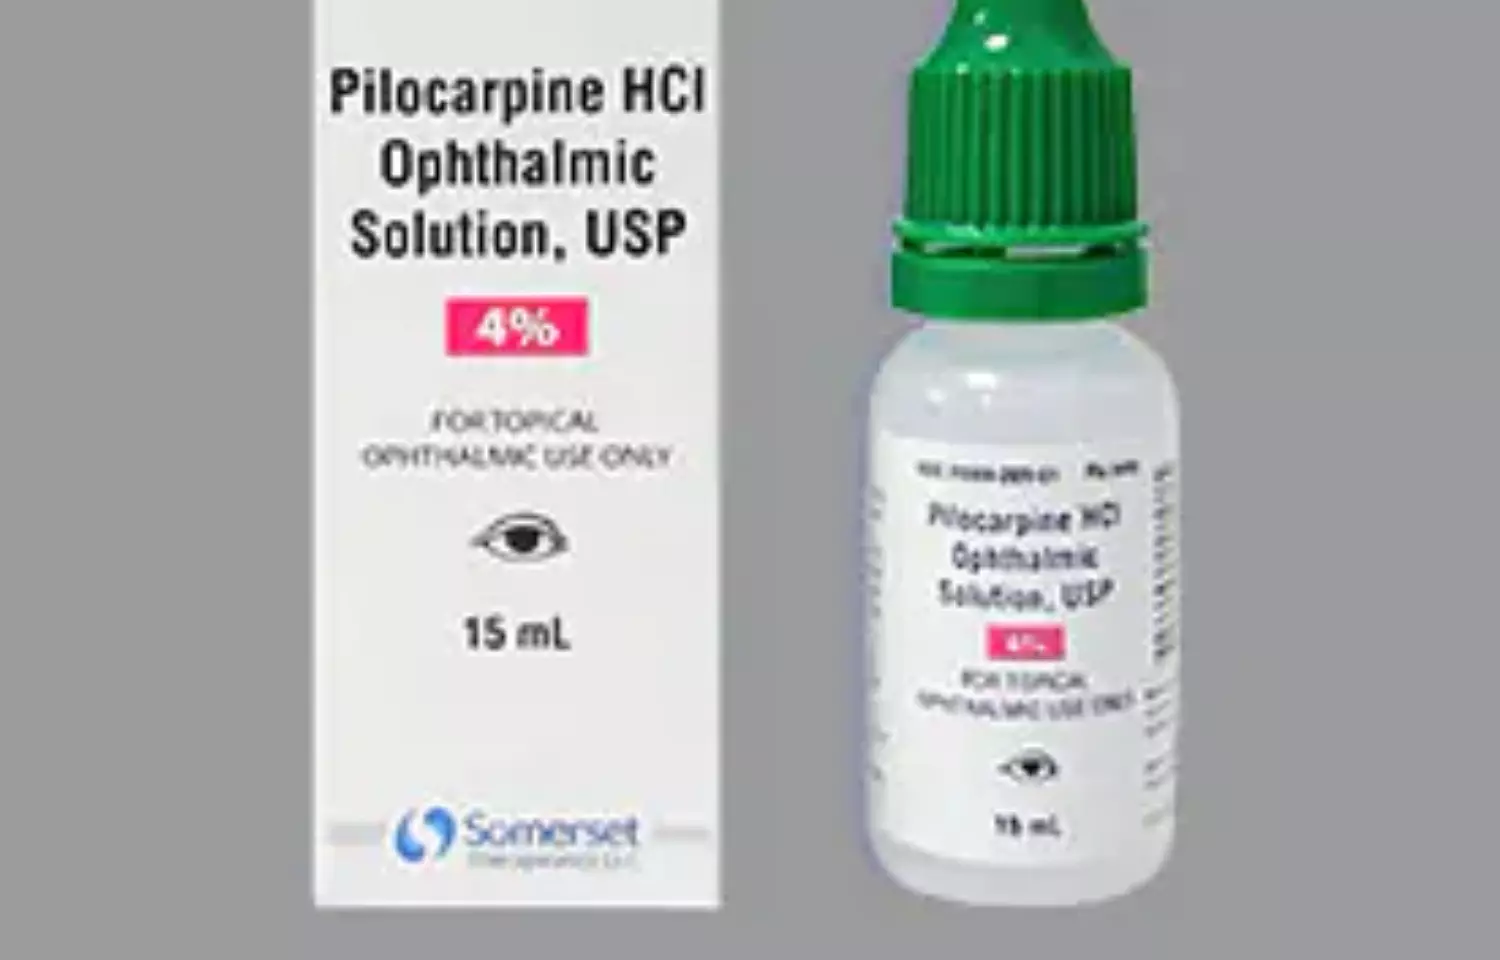 FDA approves first ever Once-daily eye drops for presbyopia